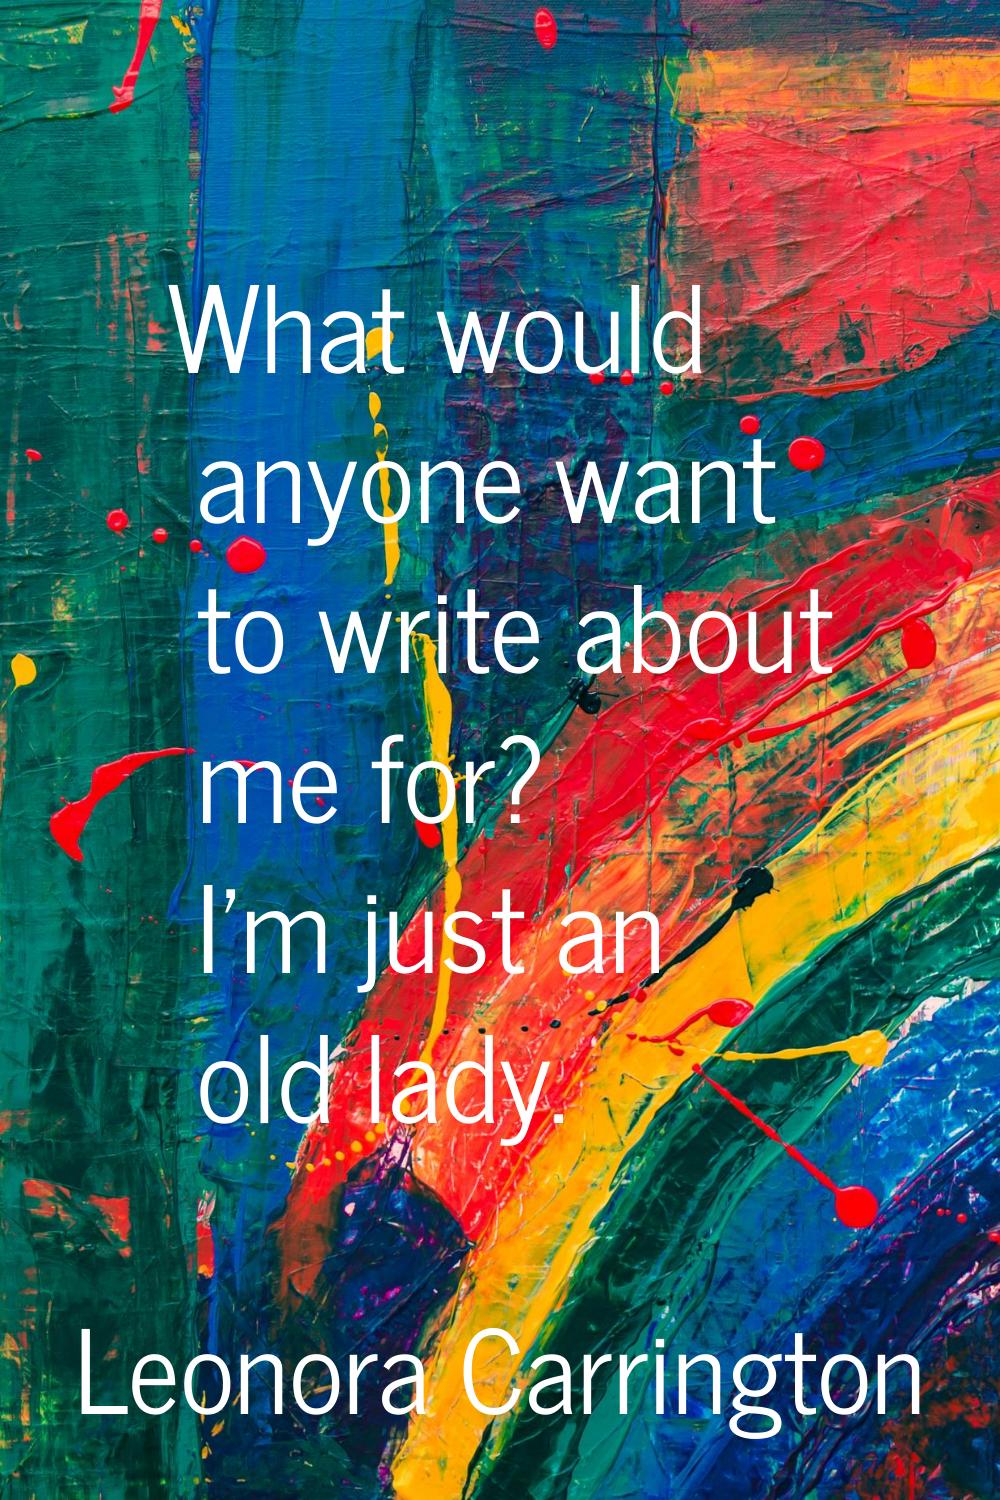 What would anyone want to write about me for? I'm just an old lady.